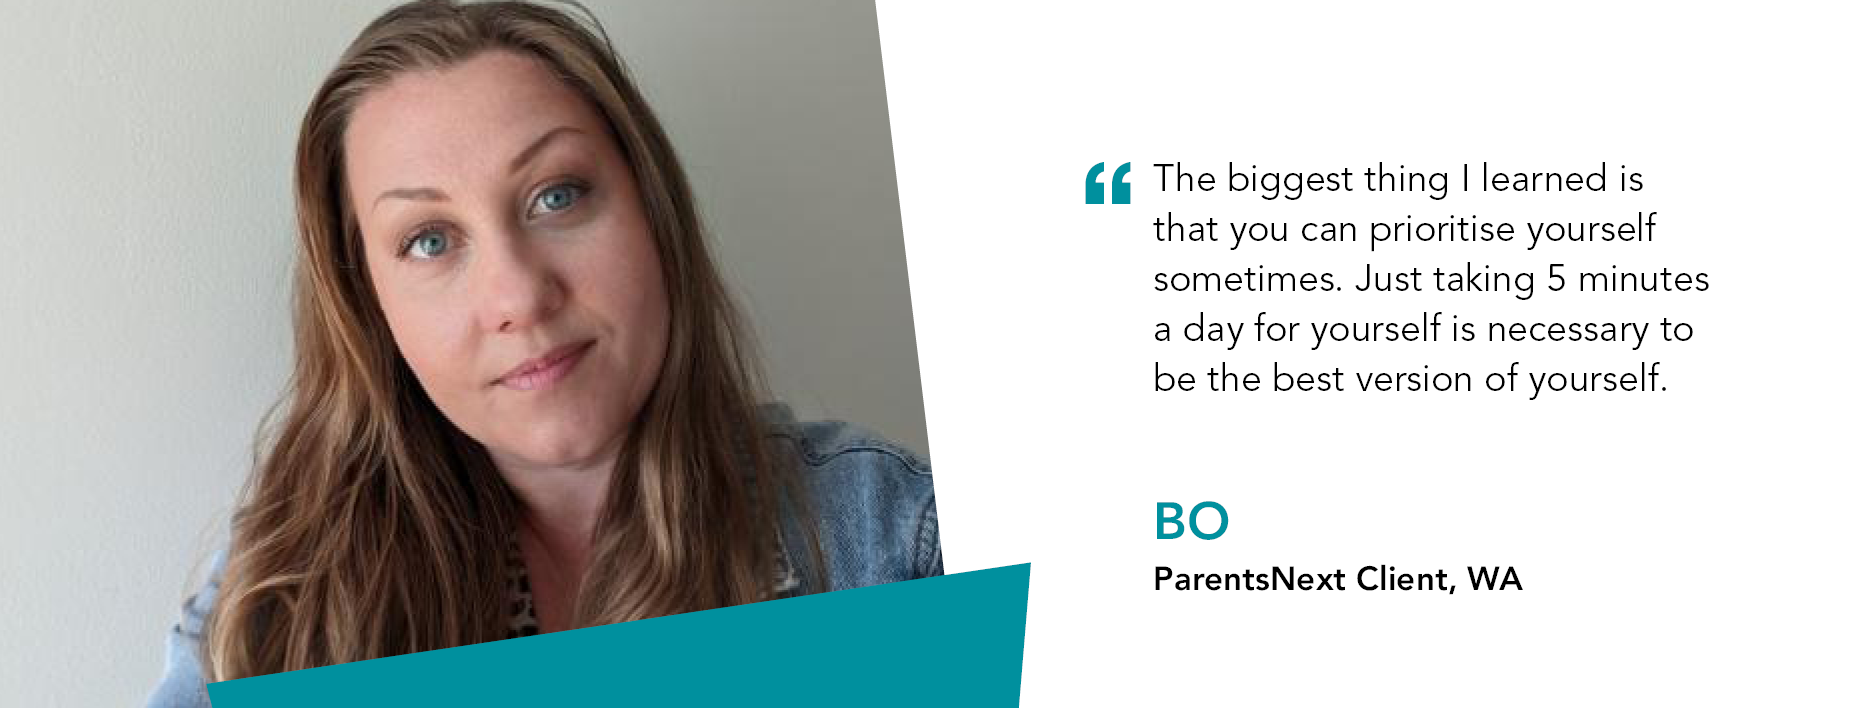 Quote reads “The biggest thing I learned is that you can prioritise yourself sometimes. Just taking 5 minutes a day for yourself is necessary to be the best version of yourself,” said ParentsNext client Bo - pictured.